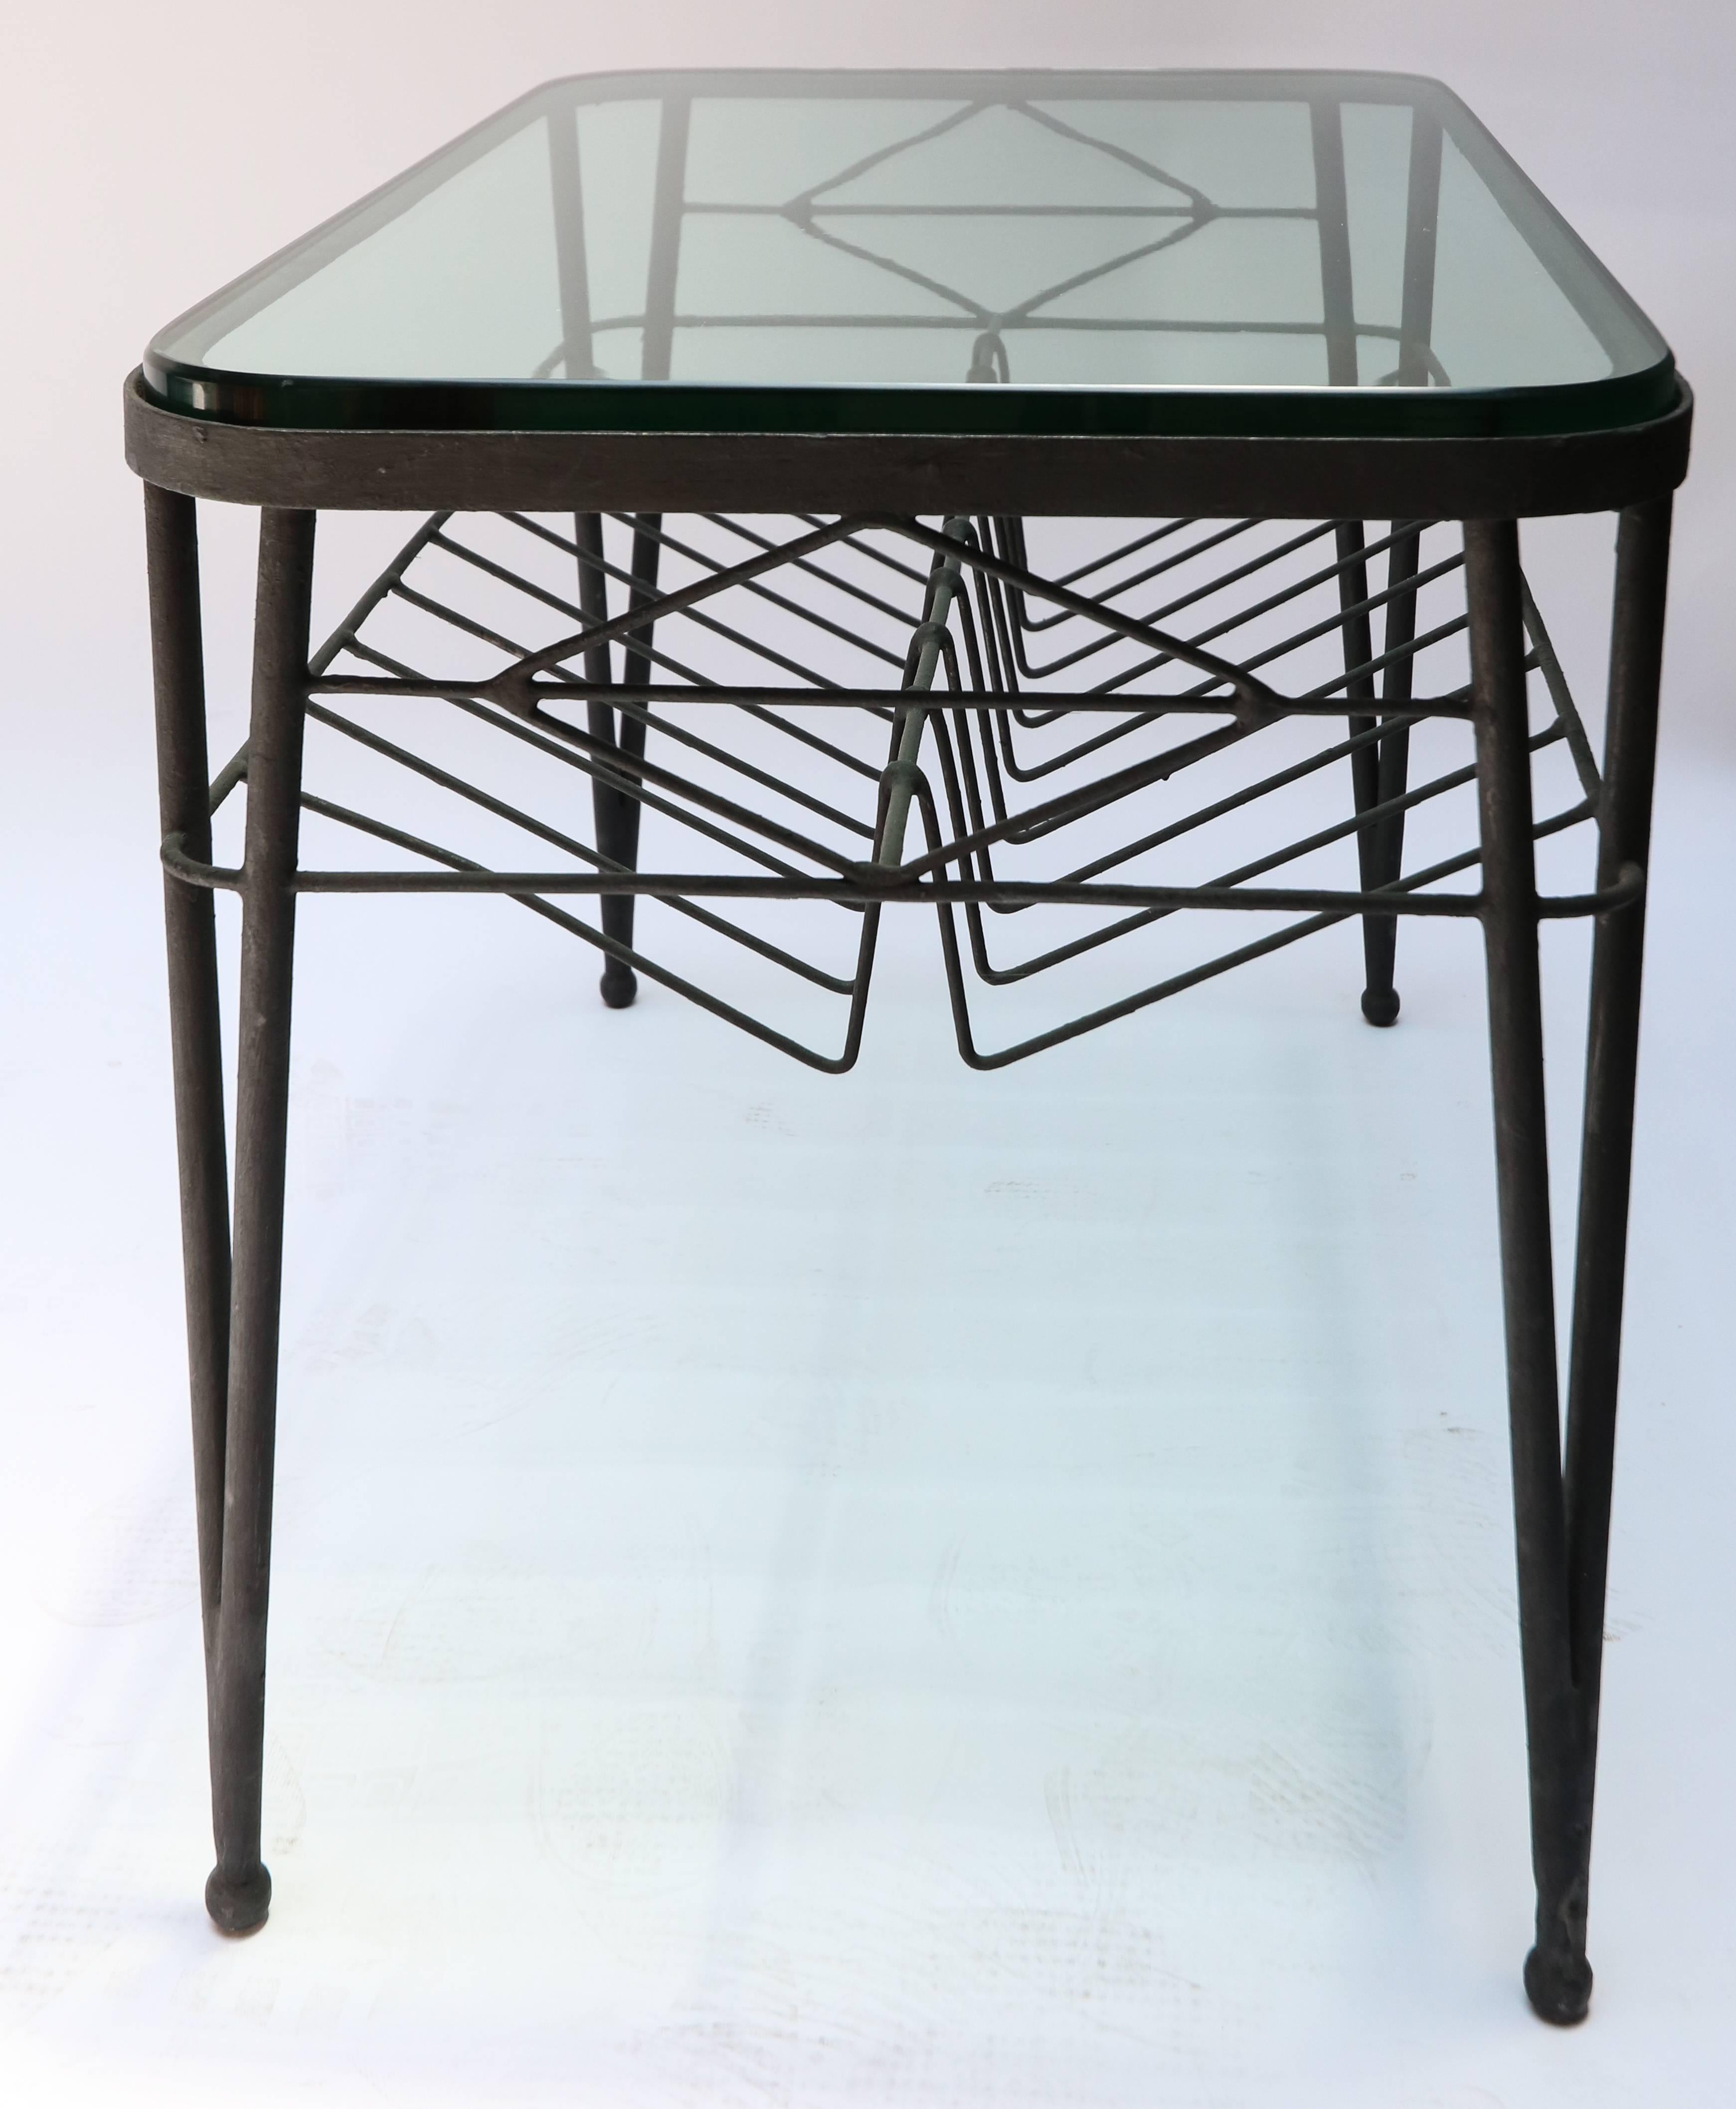 1960s Italian Rectangular Black Metal Side Table with Glass Top For Sale 1